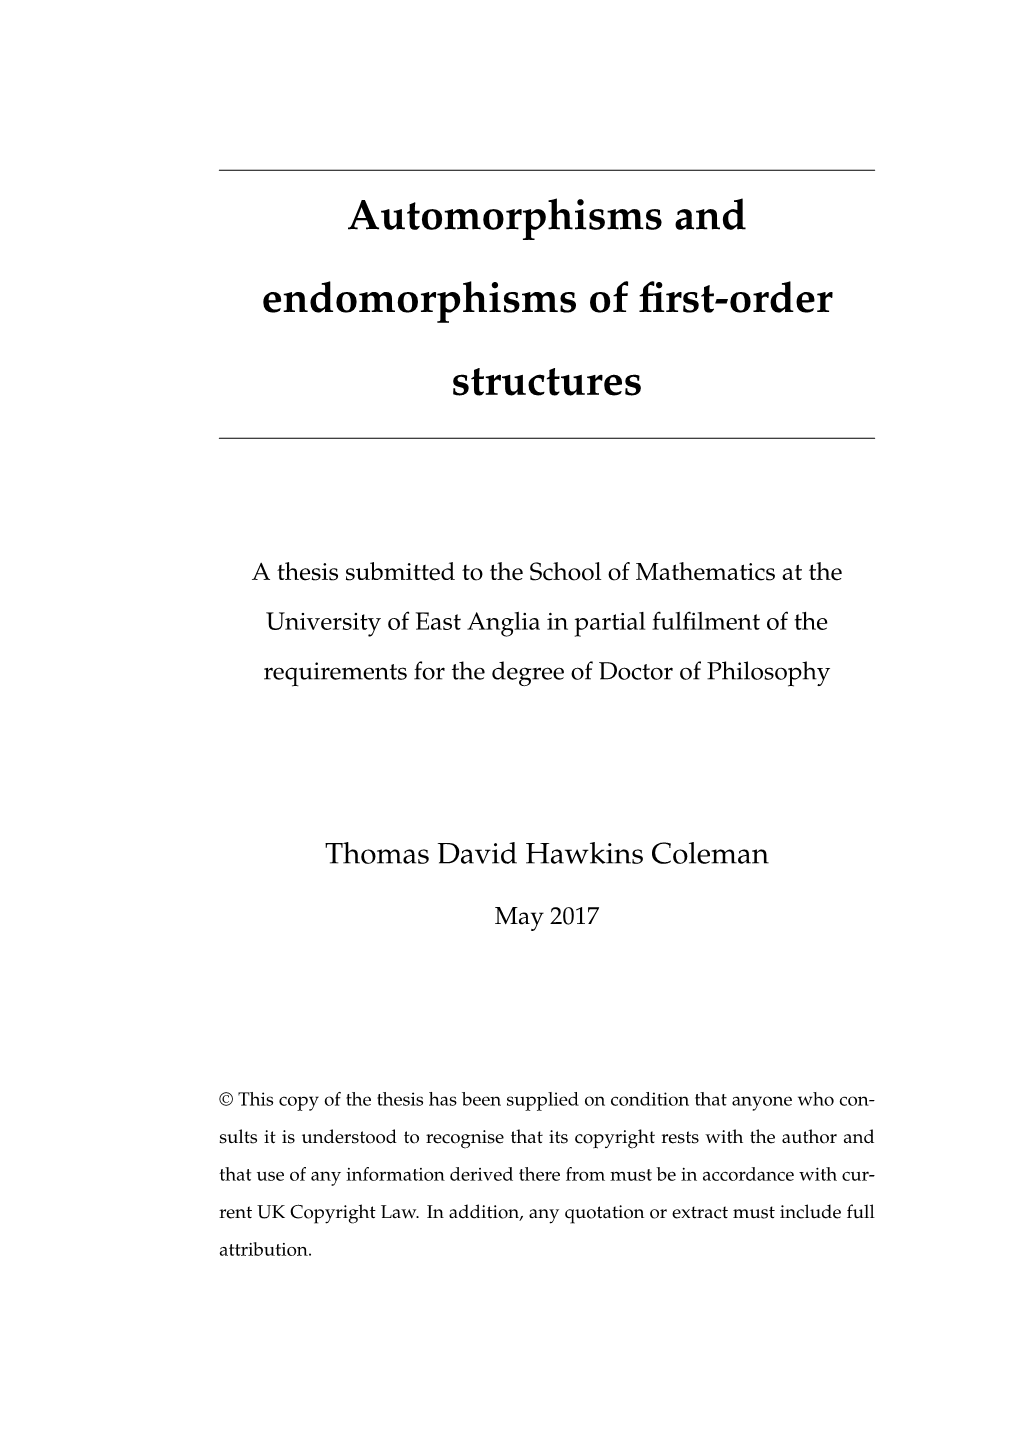 Automorphisms and Endomorphisms of First-Order Structures